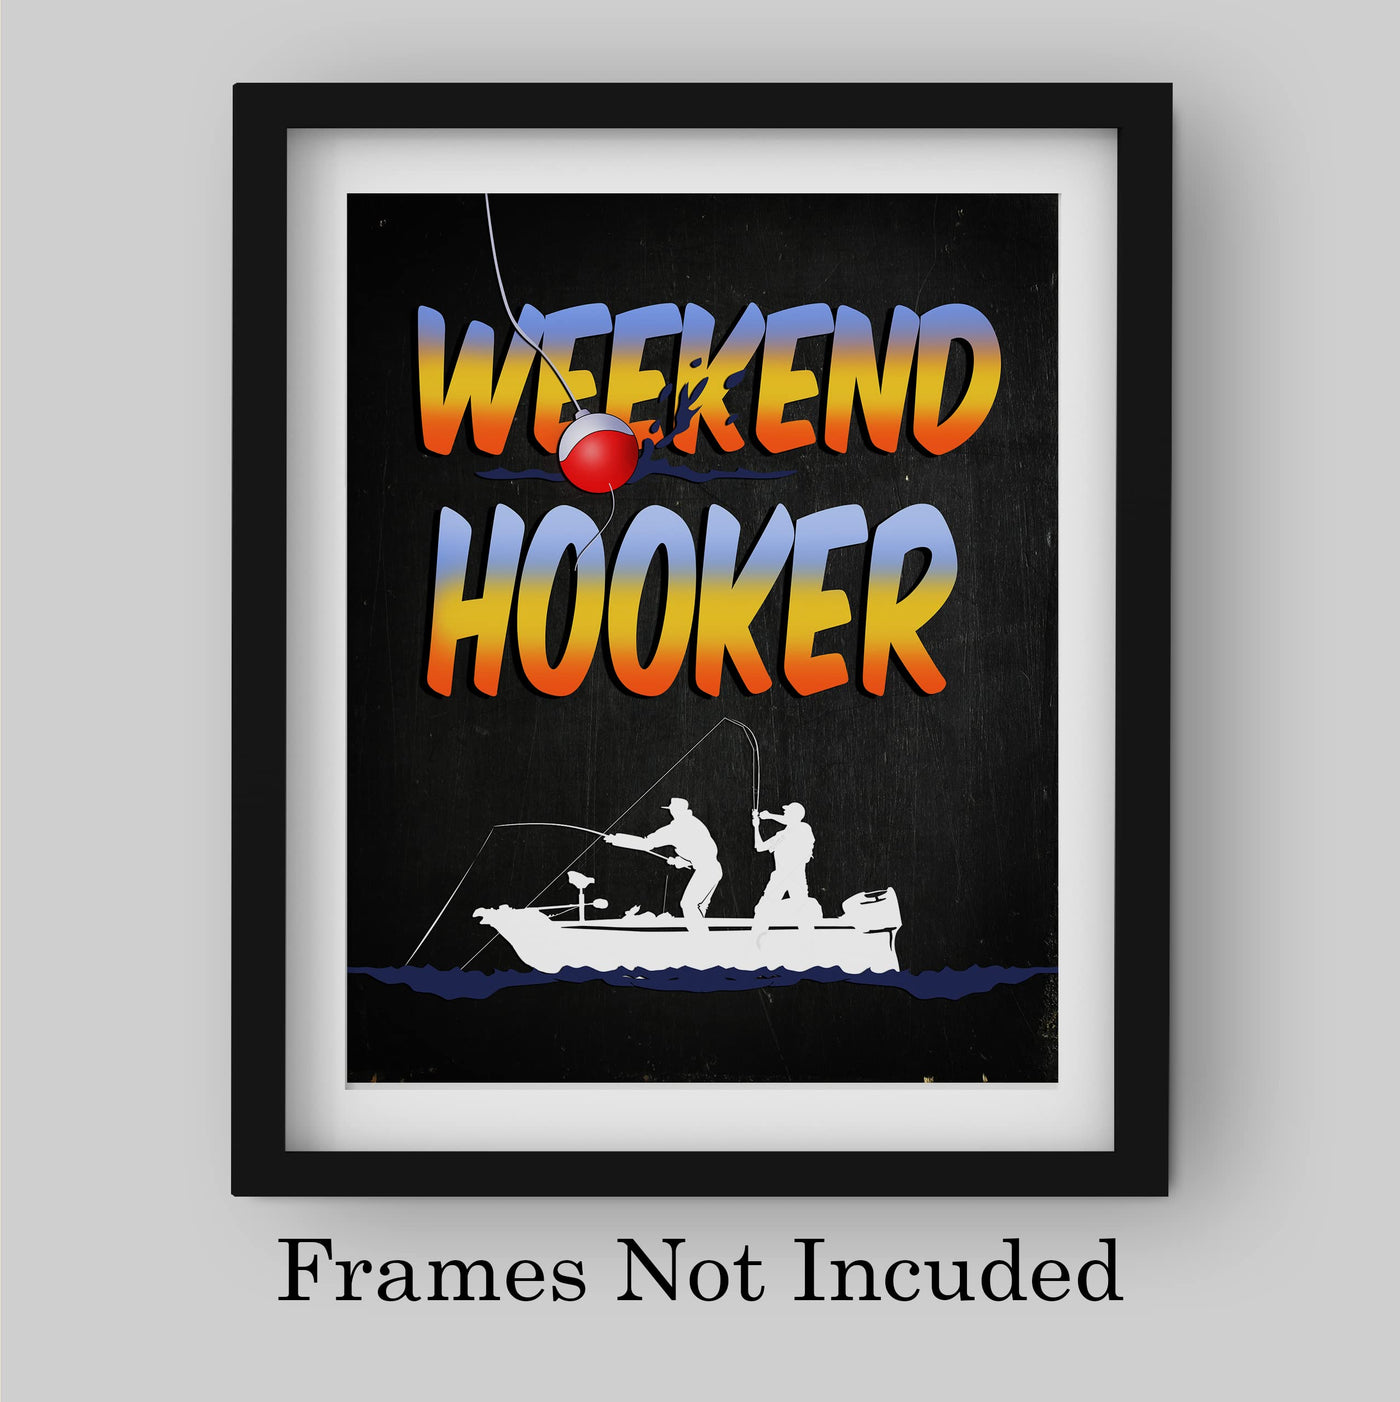 Weekend Hooker-Funny Fishing Wall Art Sign -8 x 10" Rustic Fisherman in Boat Catching Fish Print -Ready to Frame. Home-Cabin-Lodge-Lake House Decor. Great Retro Gift for Dad and All Fishermen!